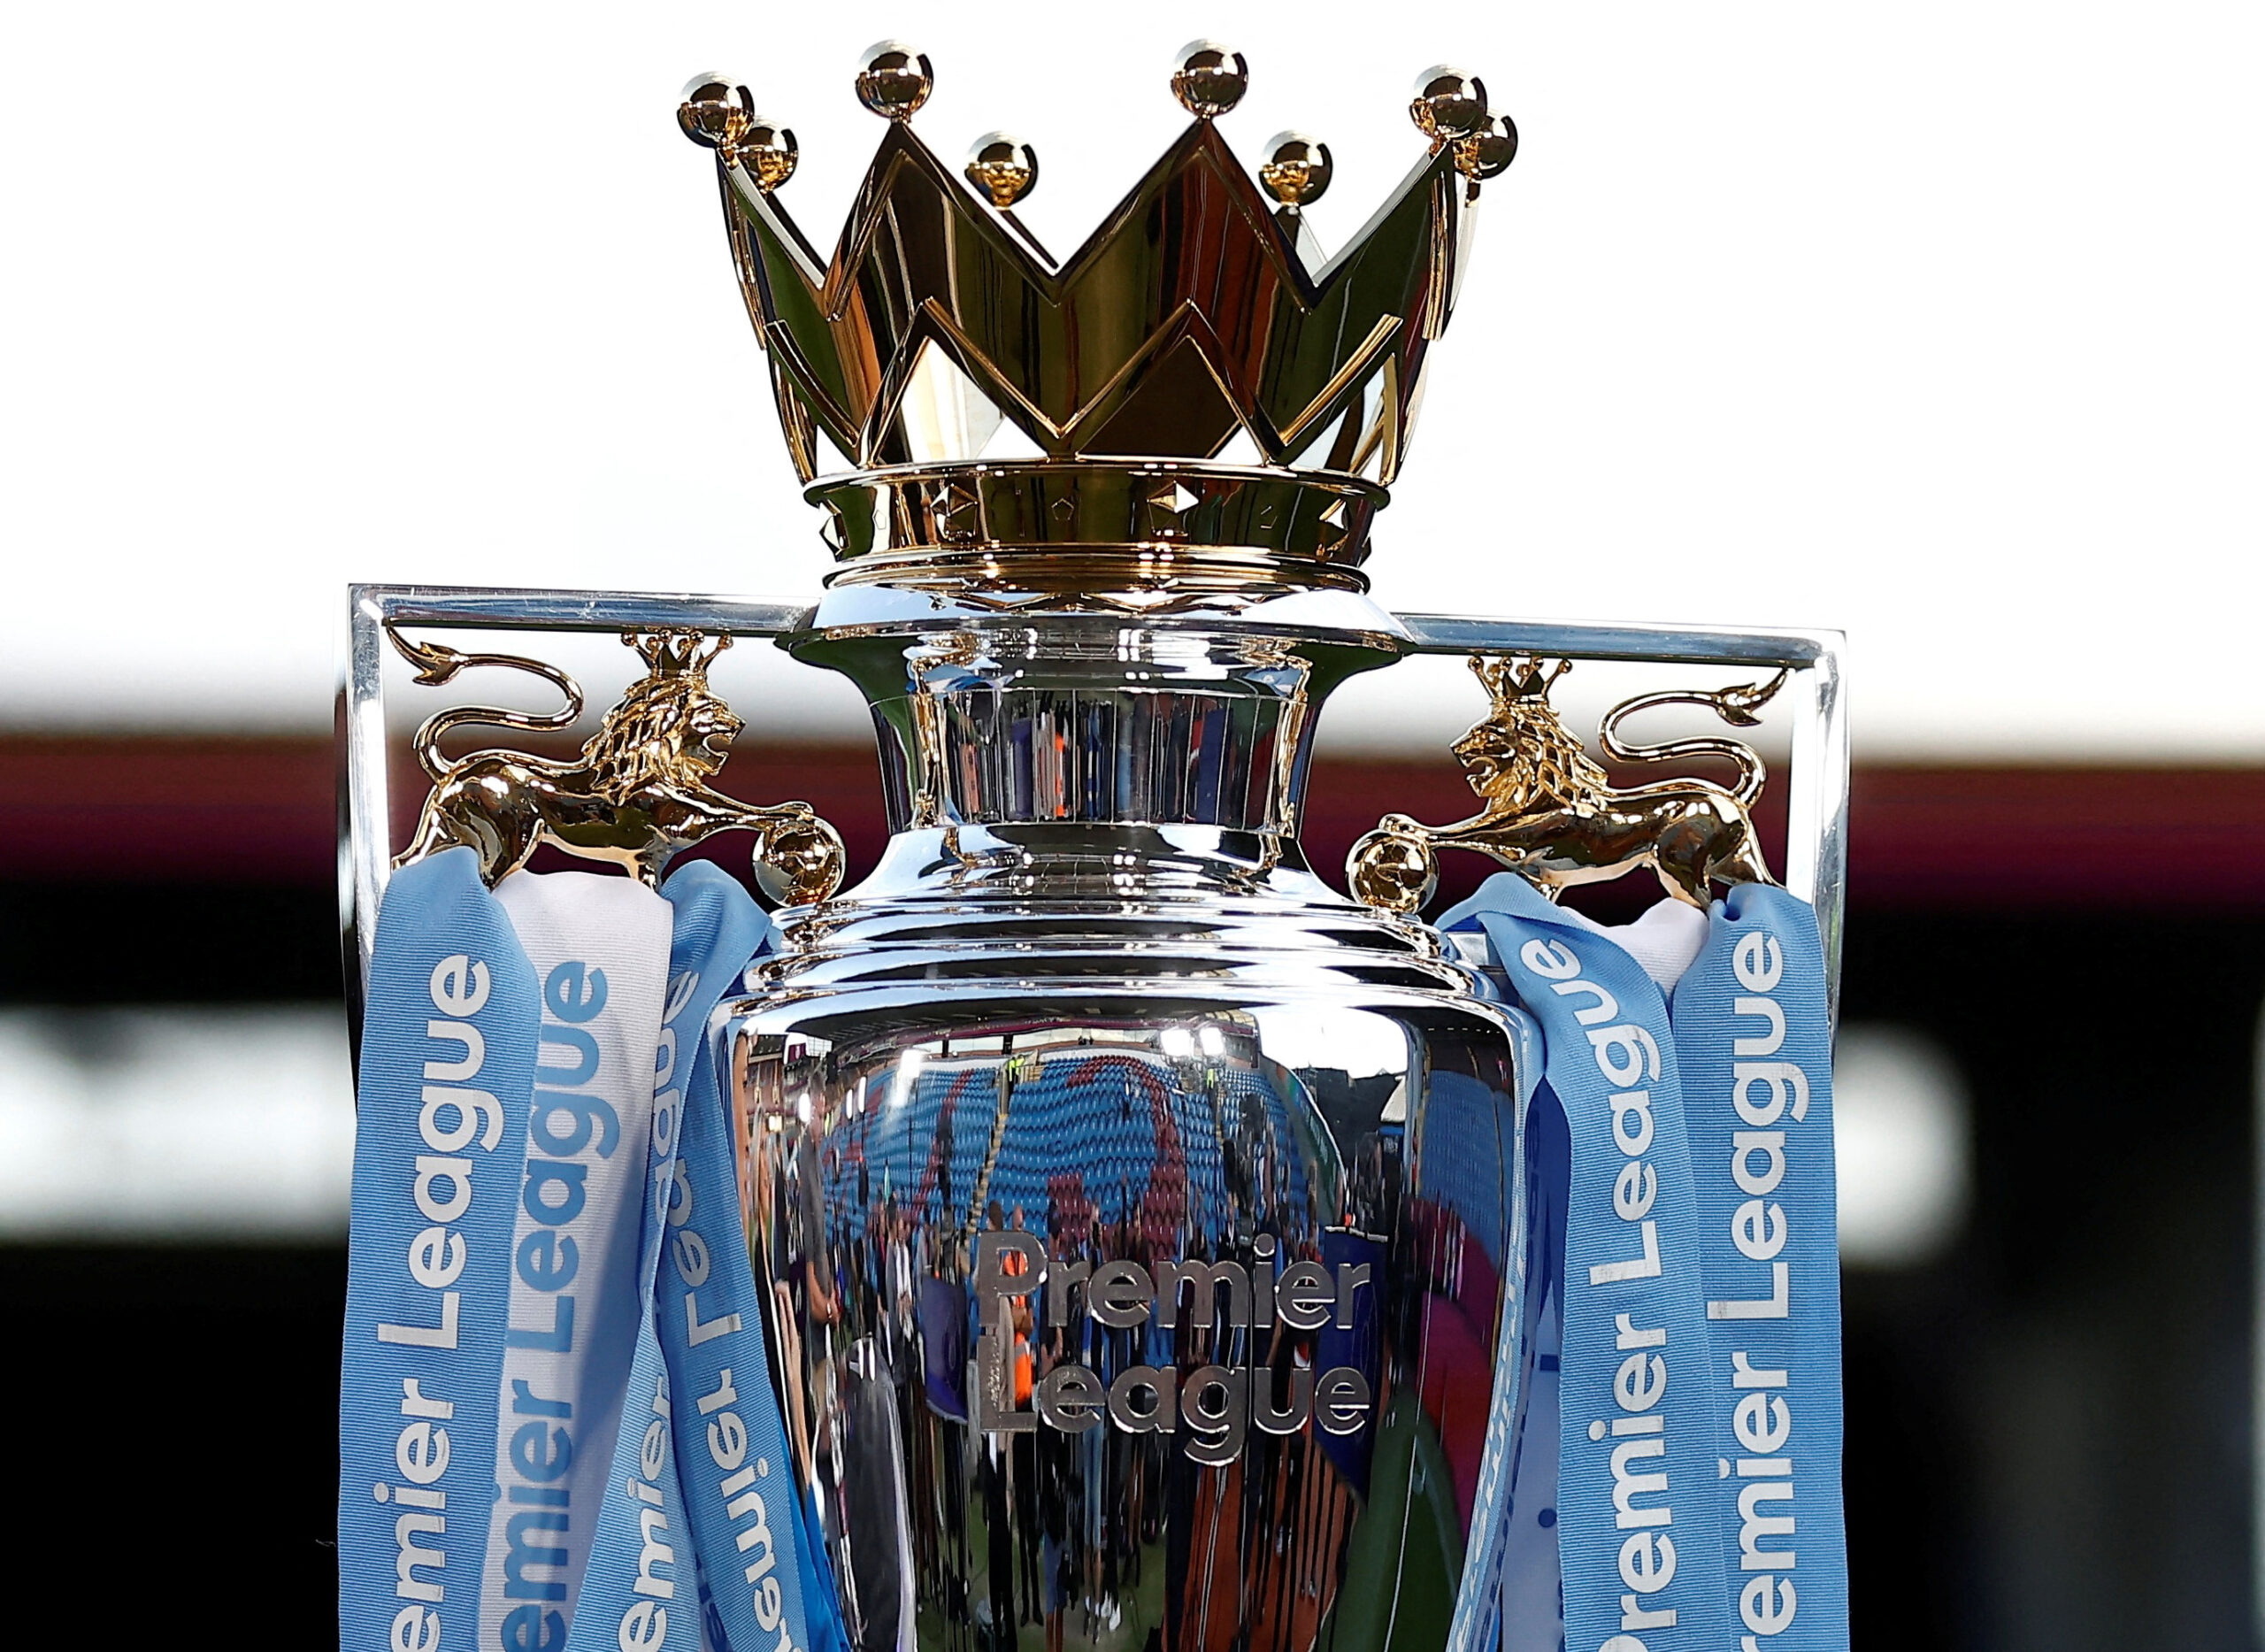 Premier League agrees record £6.7bn domestic TV rights deal